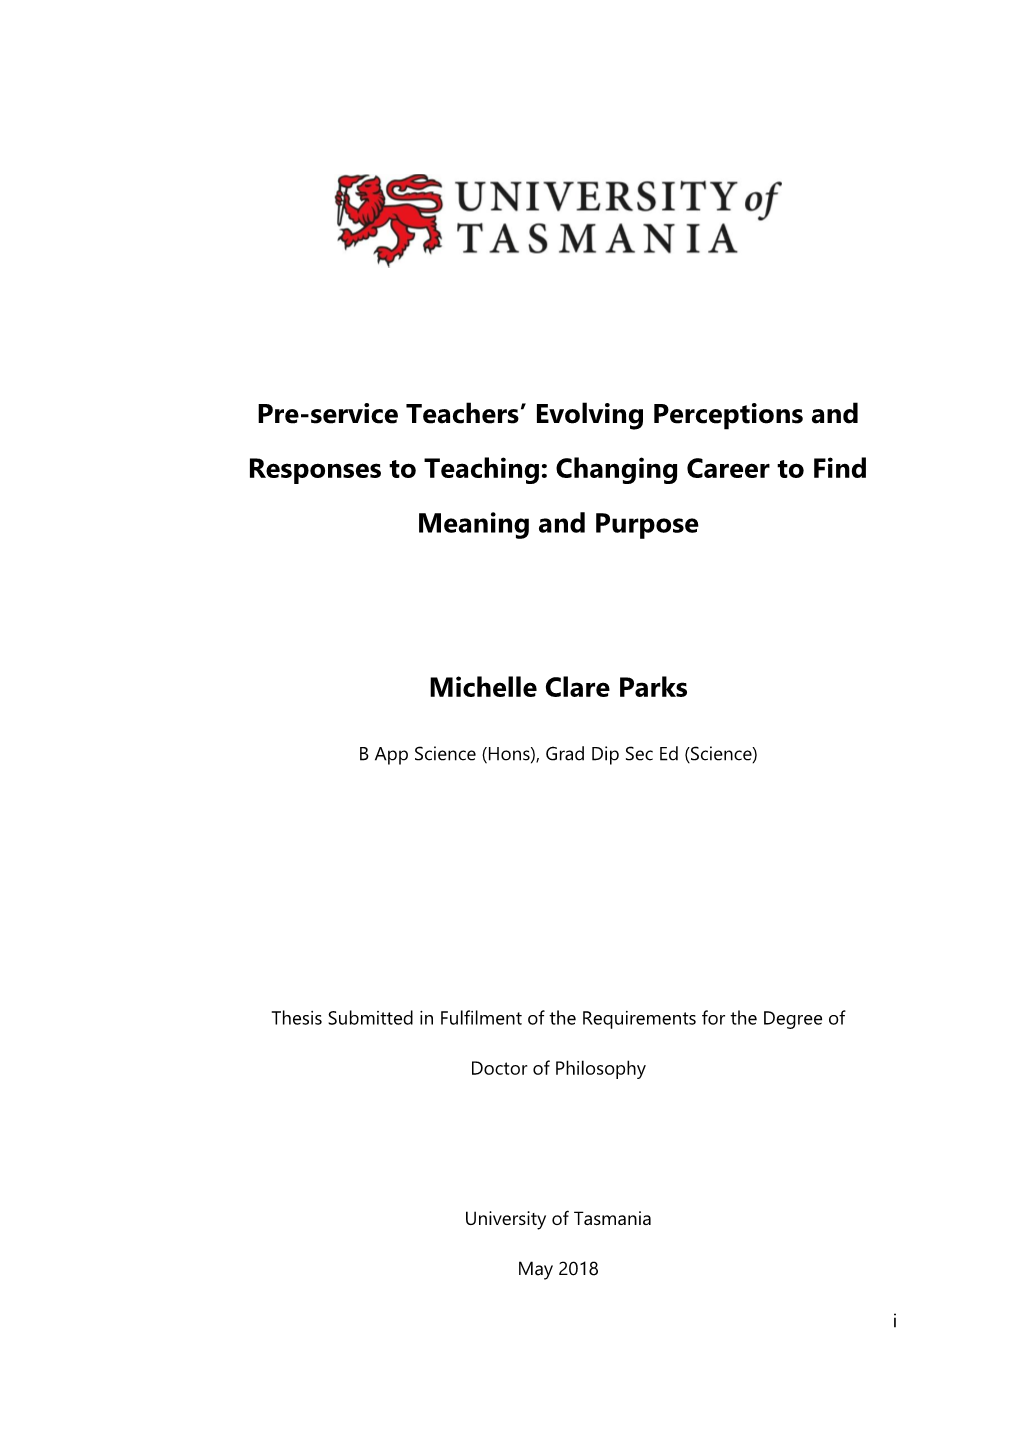 Pre-Service Teachers' Evolving Perceptions and Responses to Teaching: Changing Career to Find Meaning and Purpose